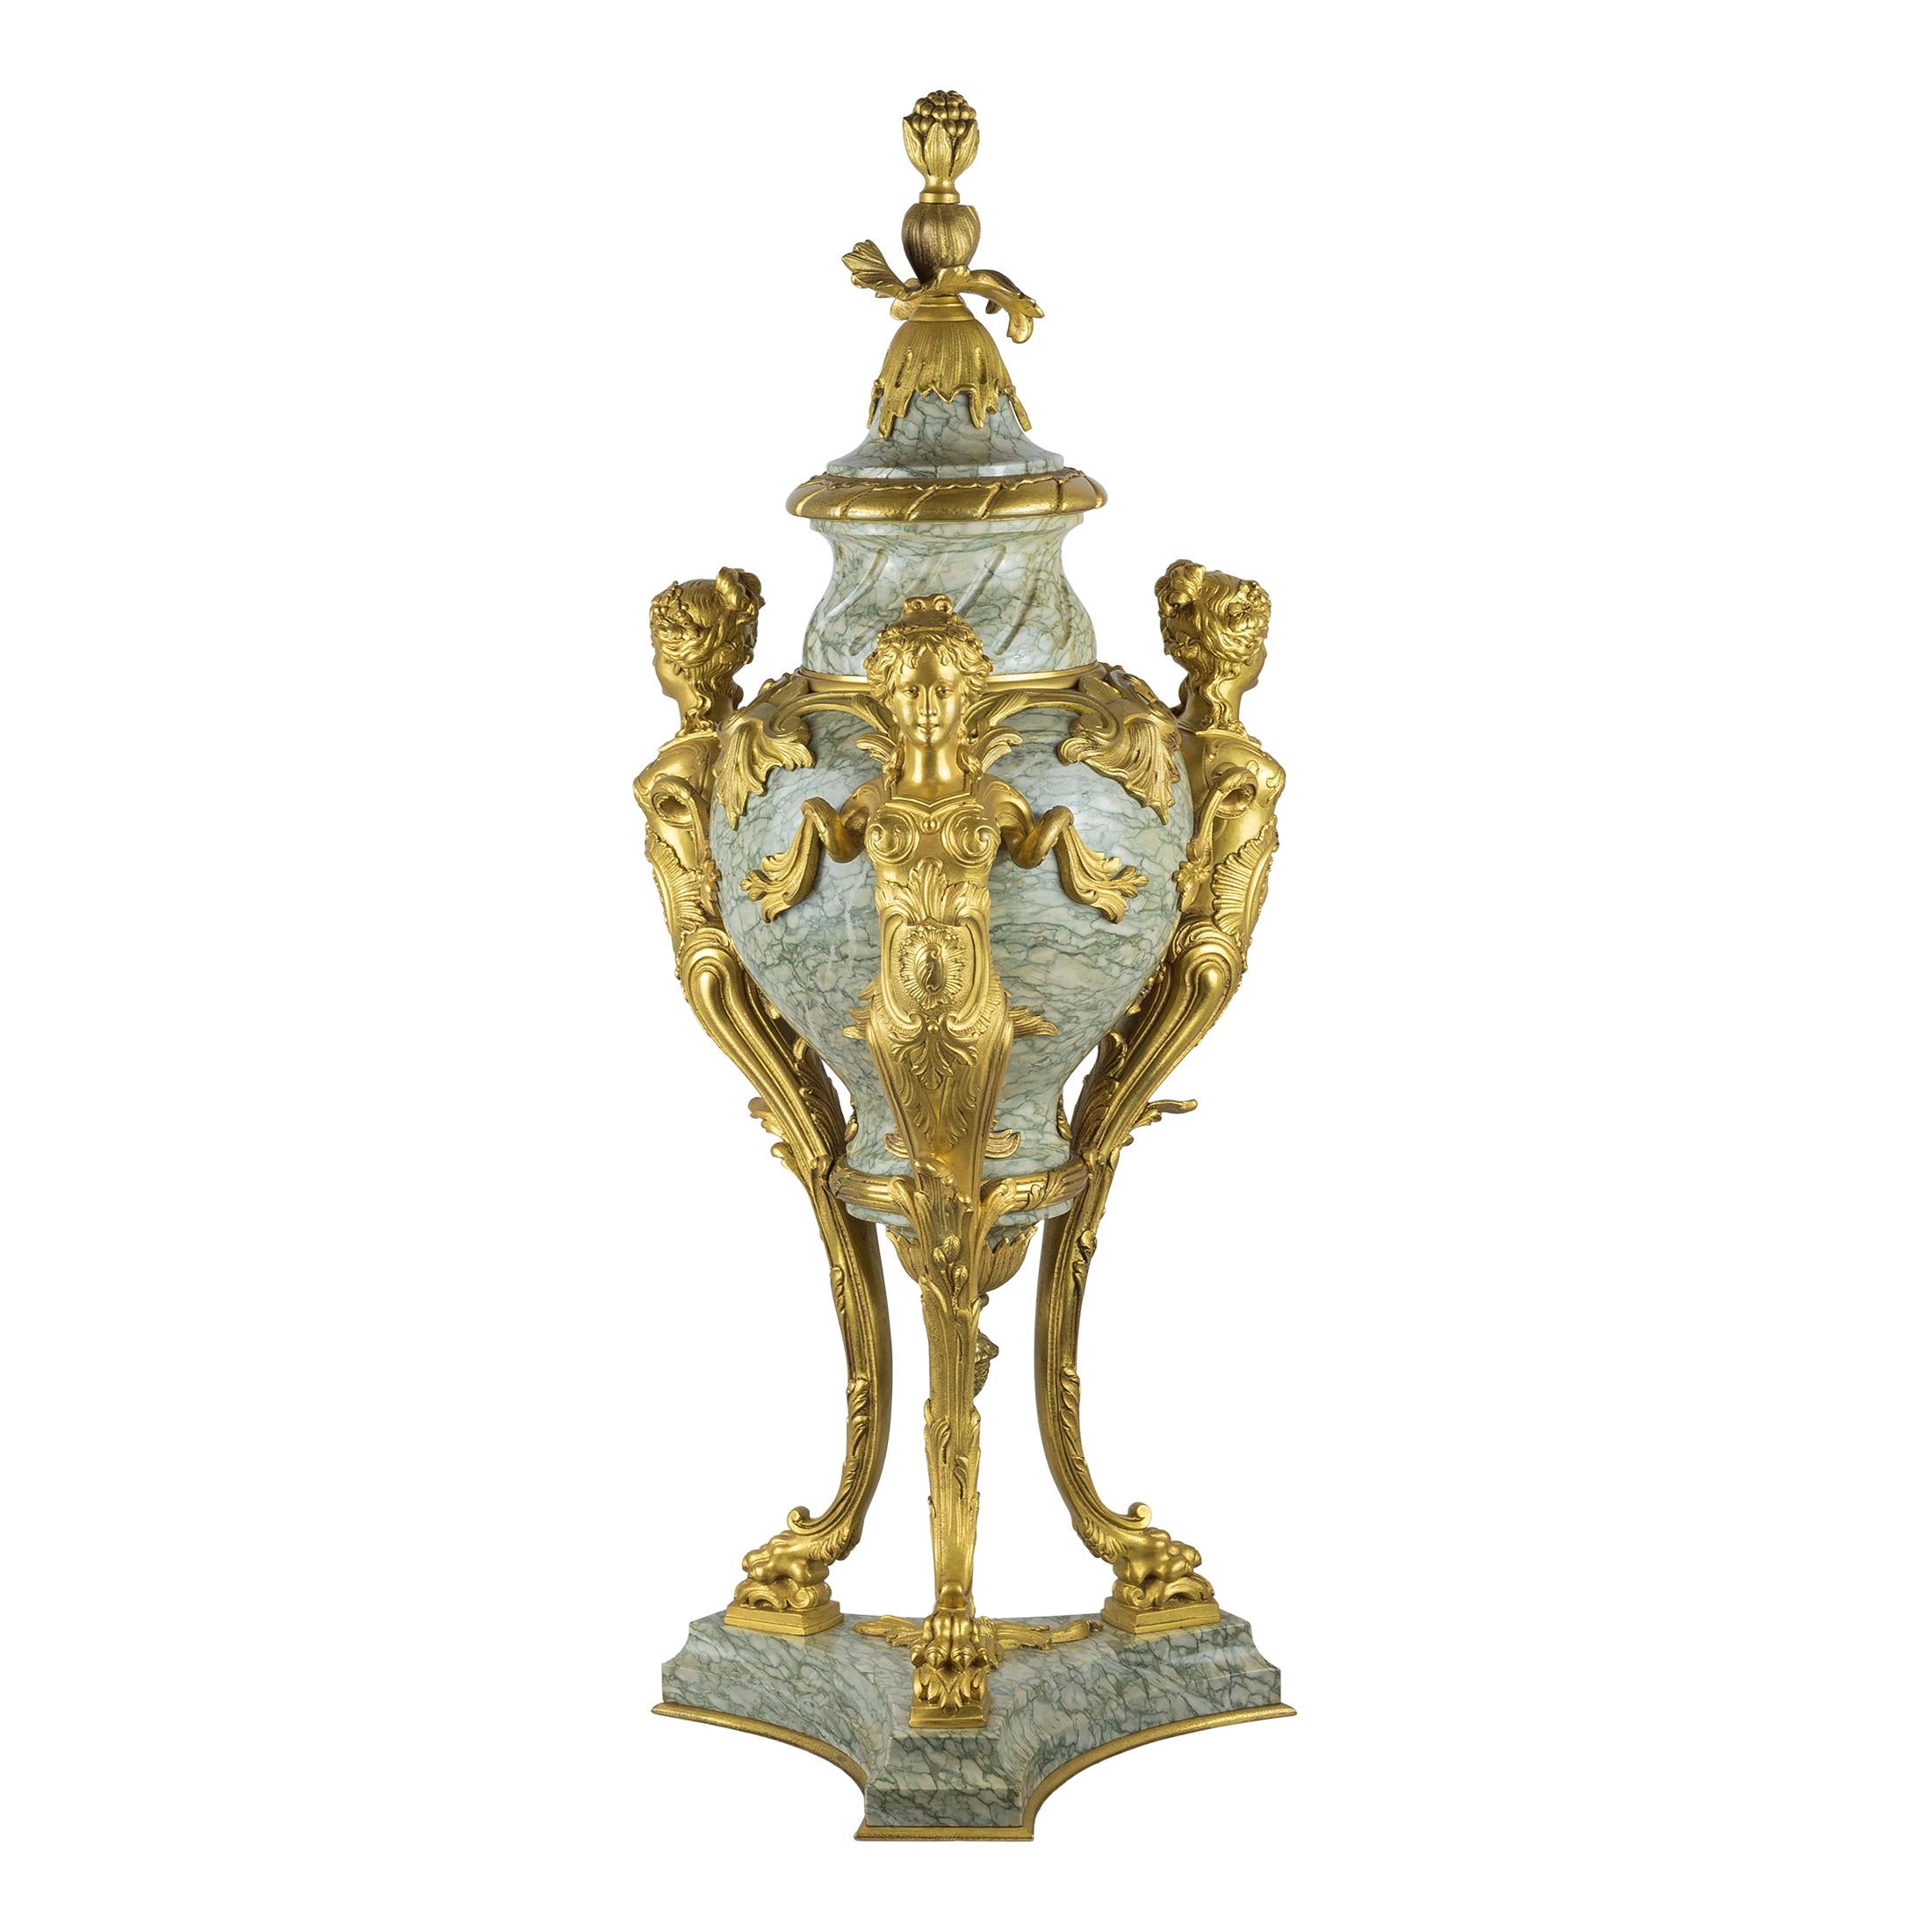 A monumental pair of baluster form gilt bronze-mounted Cipollino Verde mandolato marble urns.
The spiral fluted neck surmounted by an integral bell form cover terminating in elaborate fruiting finial, supported by three finely casted Caryatid